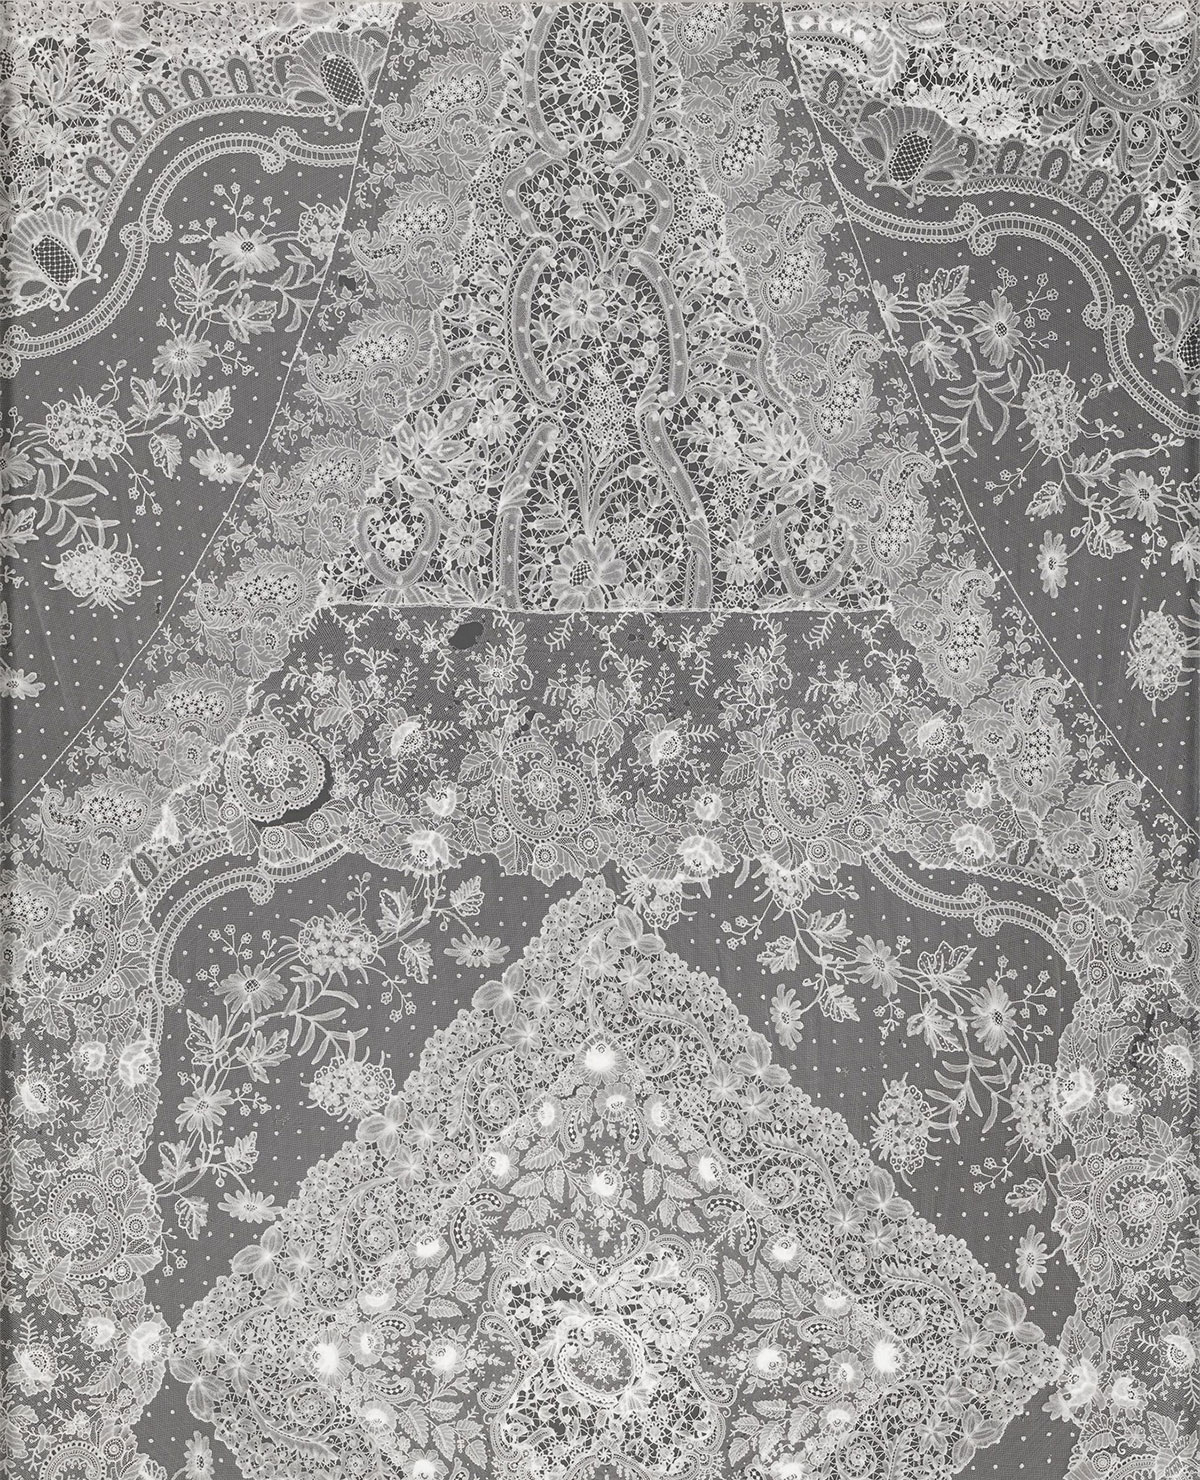 A symmetrical, intricate lace pattern in monochrome shades